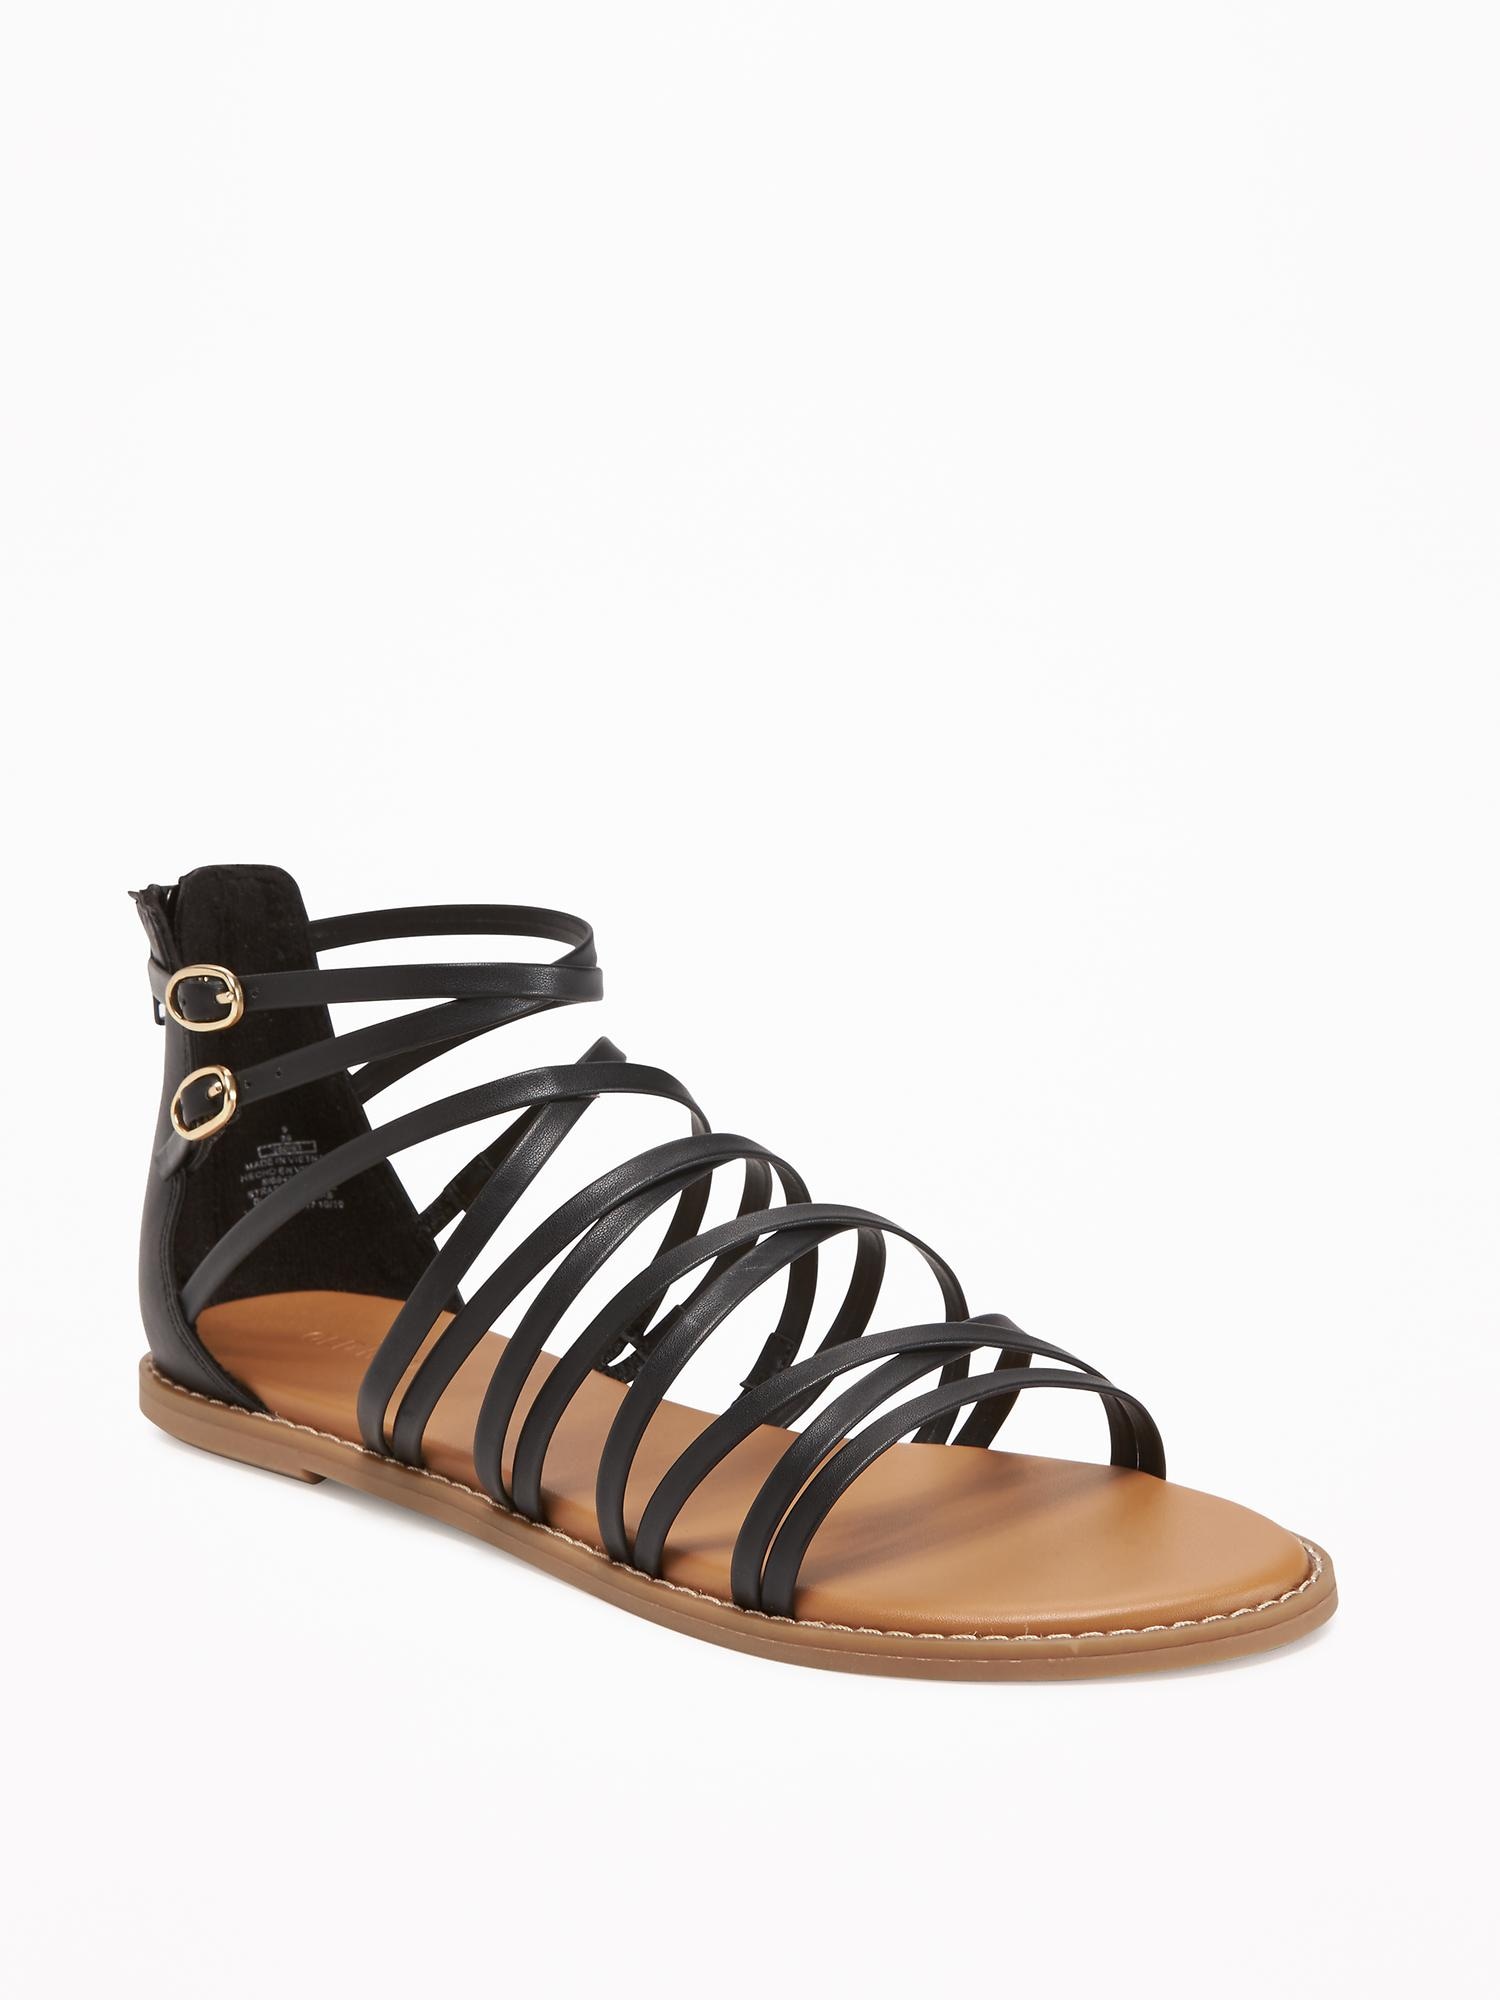 Strappy Gladiator Sandals for Women | Old Navy